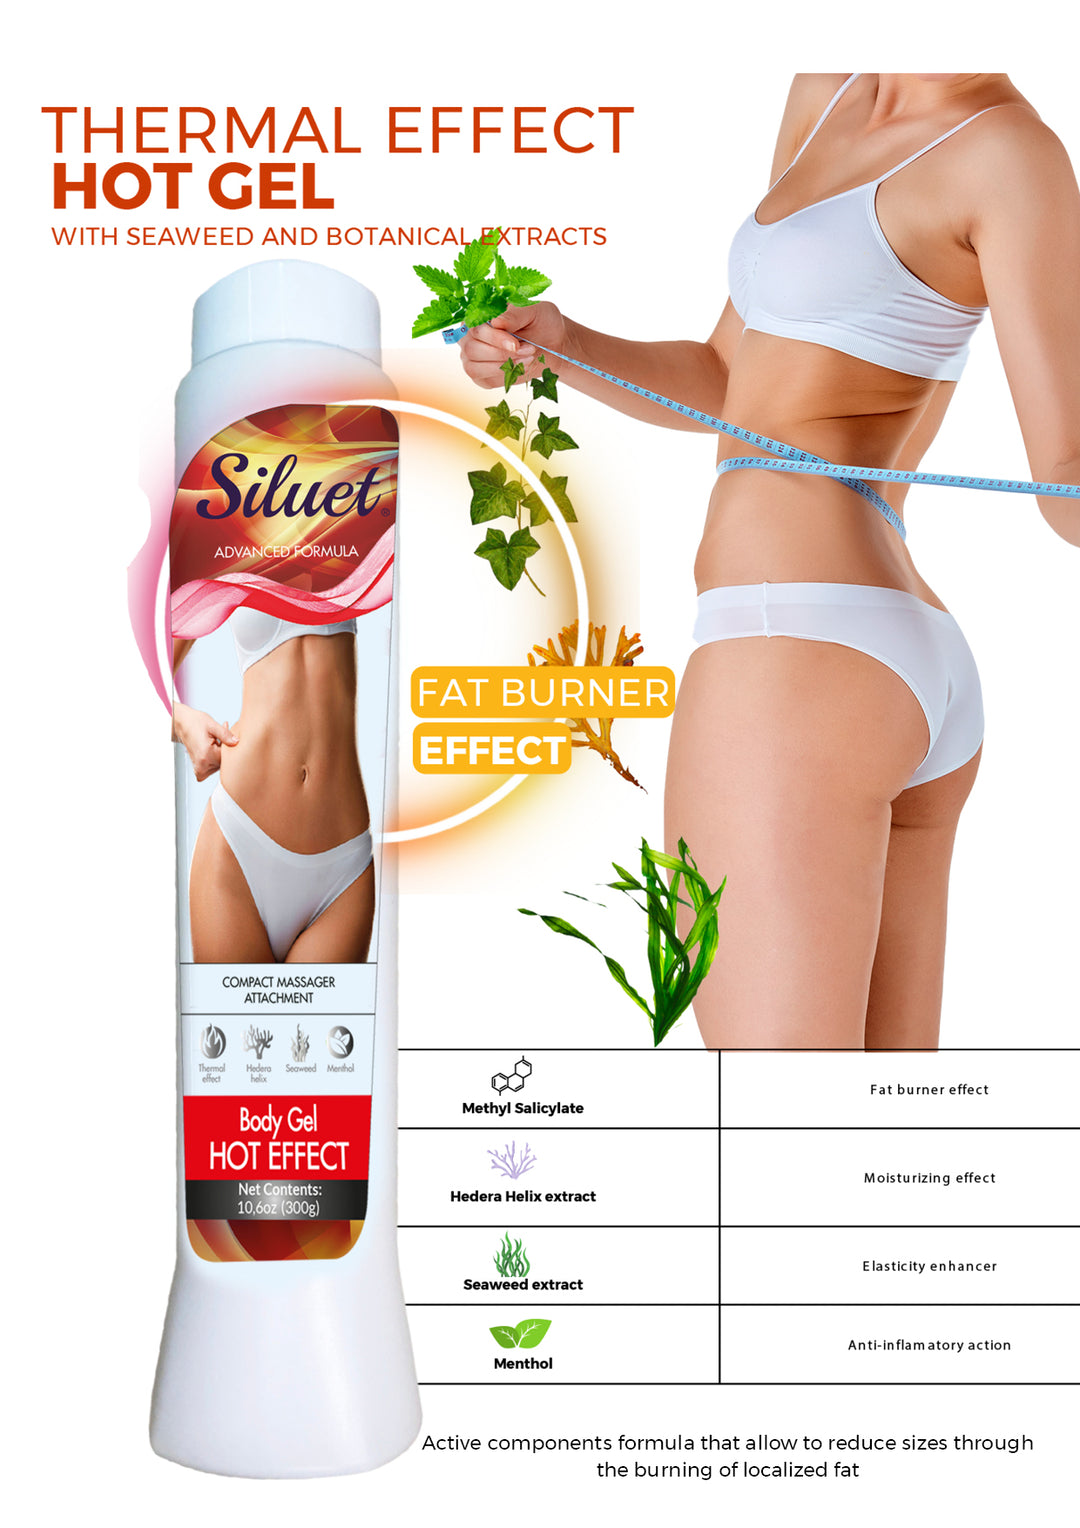 Siluet Thermal Reducer Hot Gel with Seaweed and Botanical Extracts